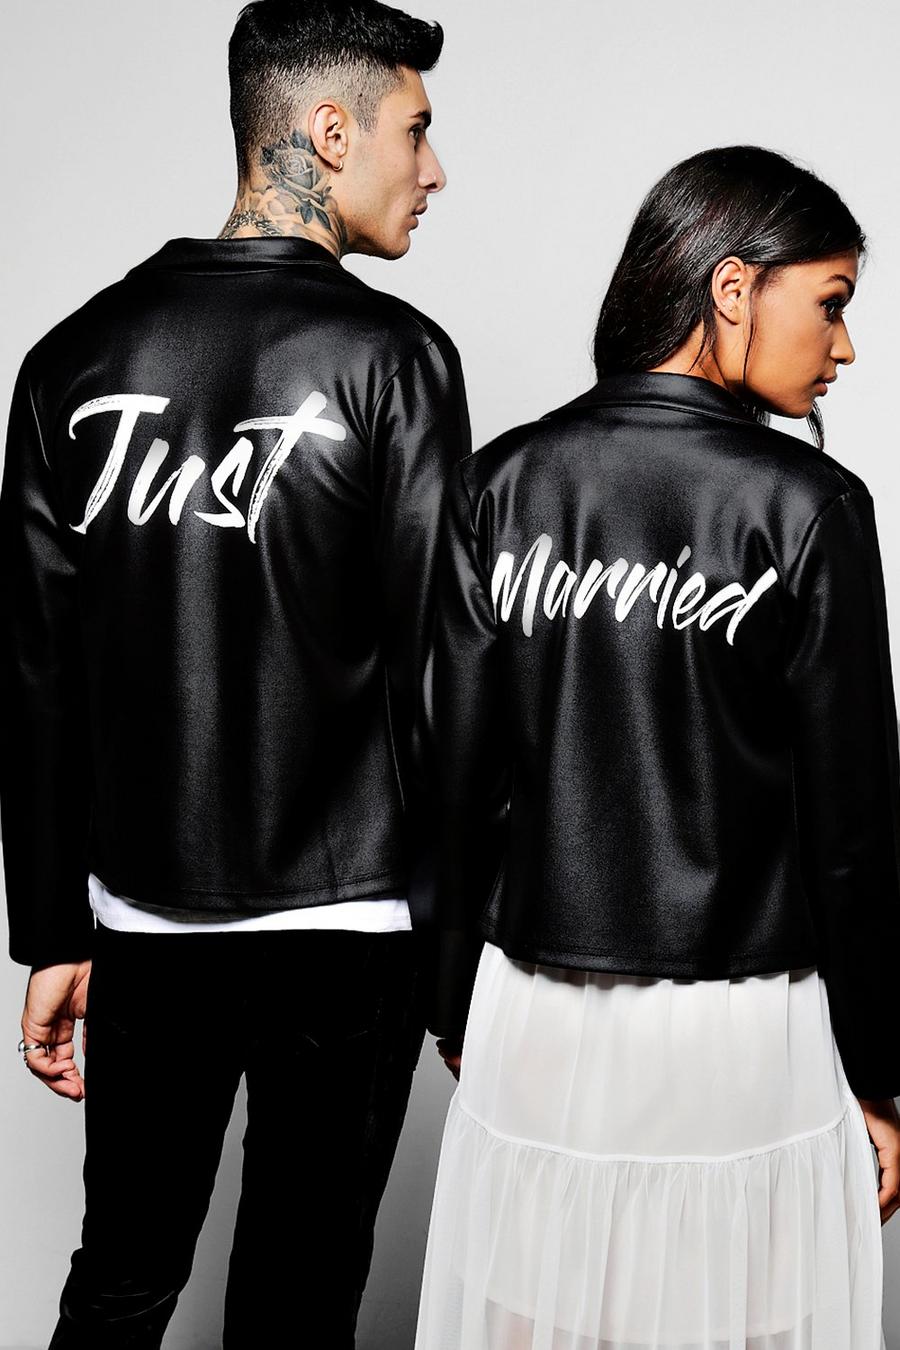 Just Married His/Hers Biker Jacket (His Only), Black image number 1